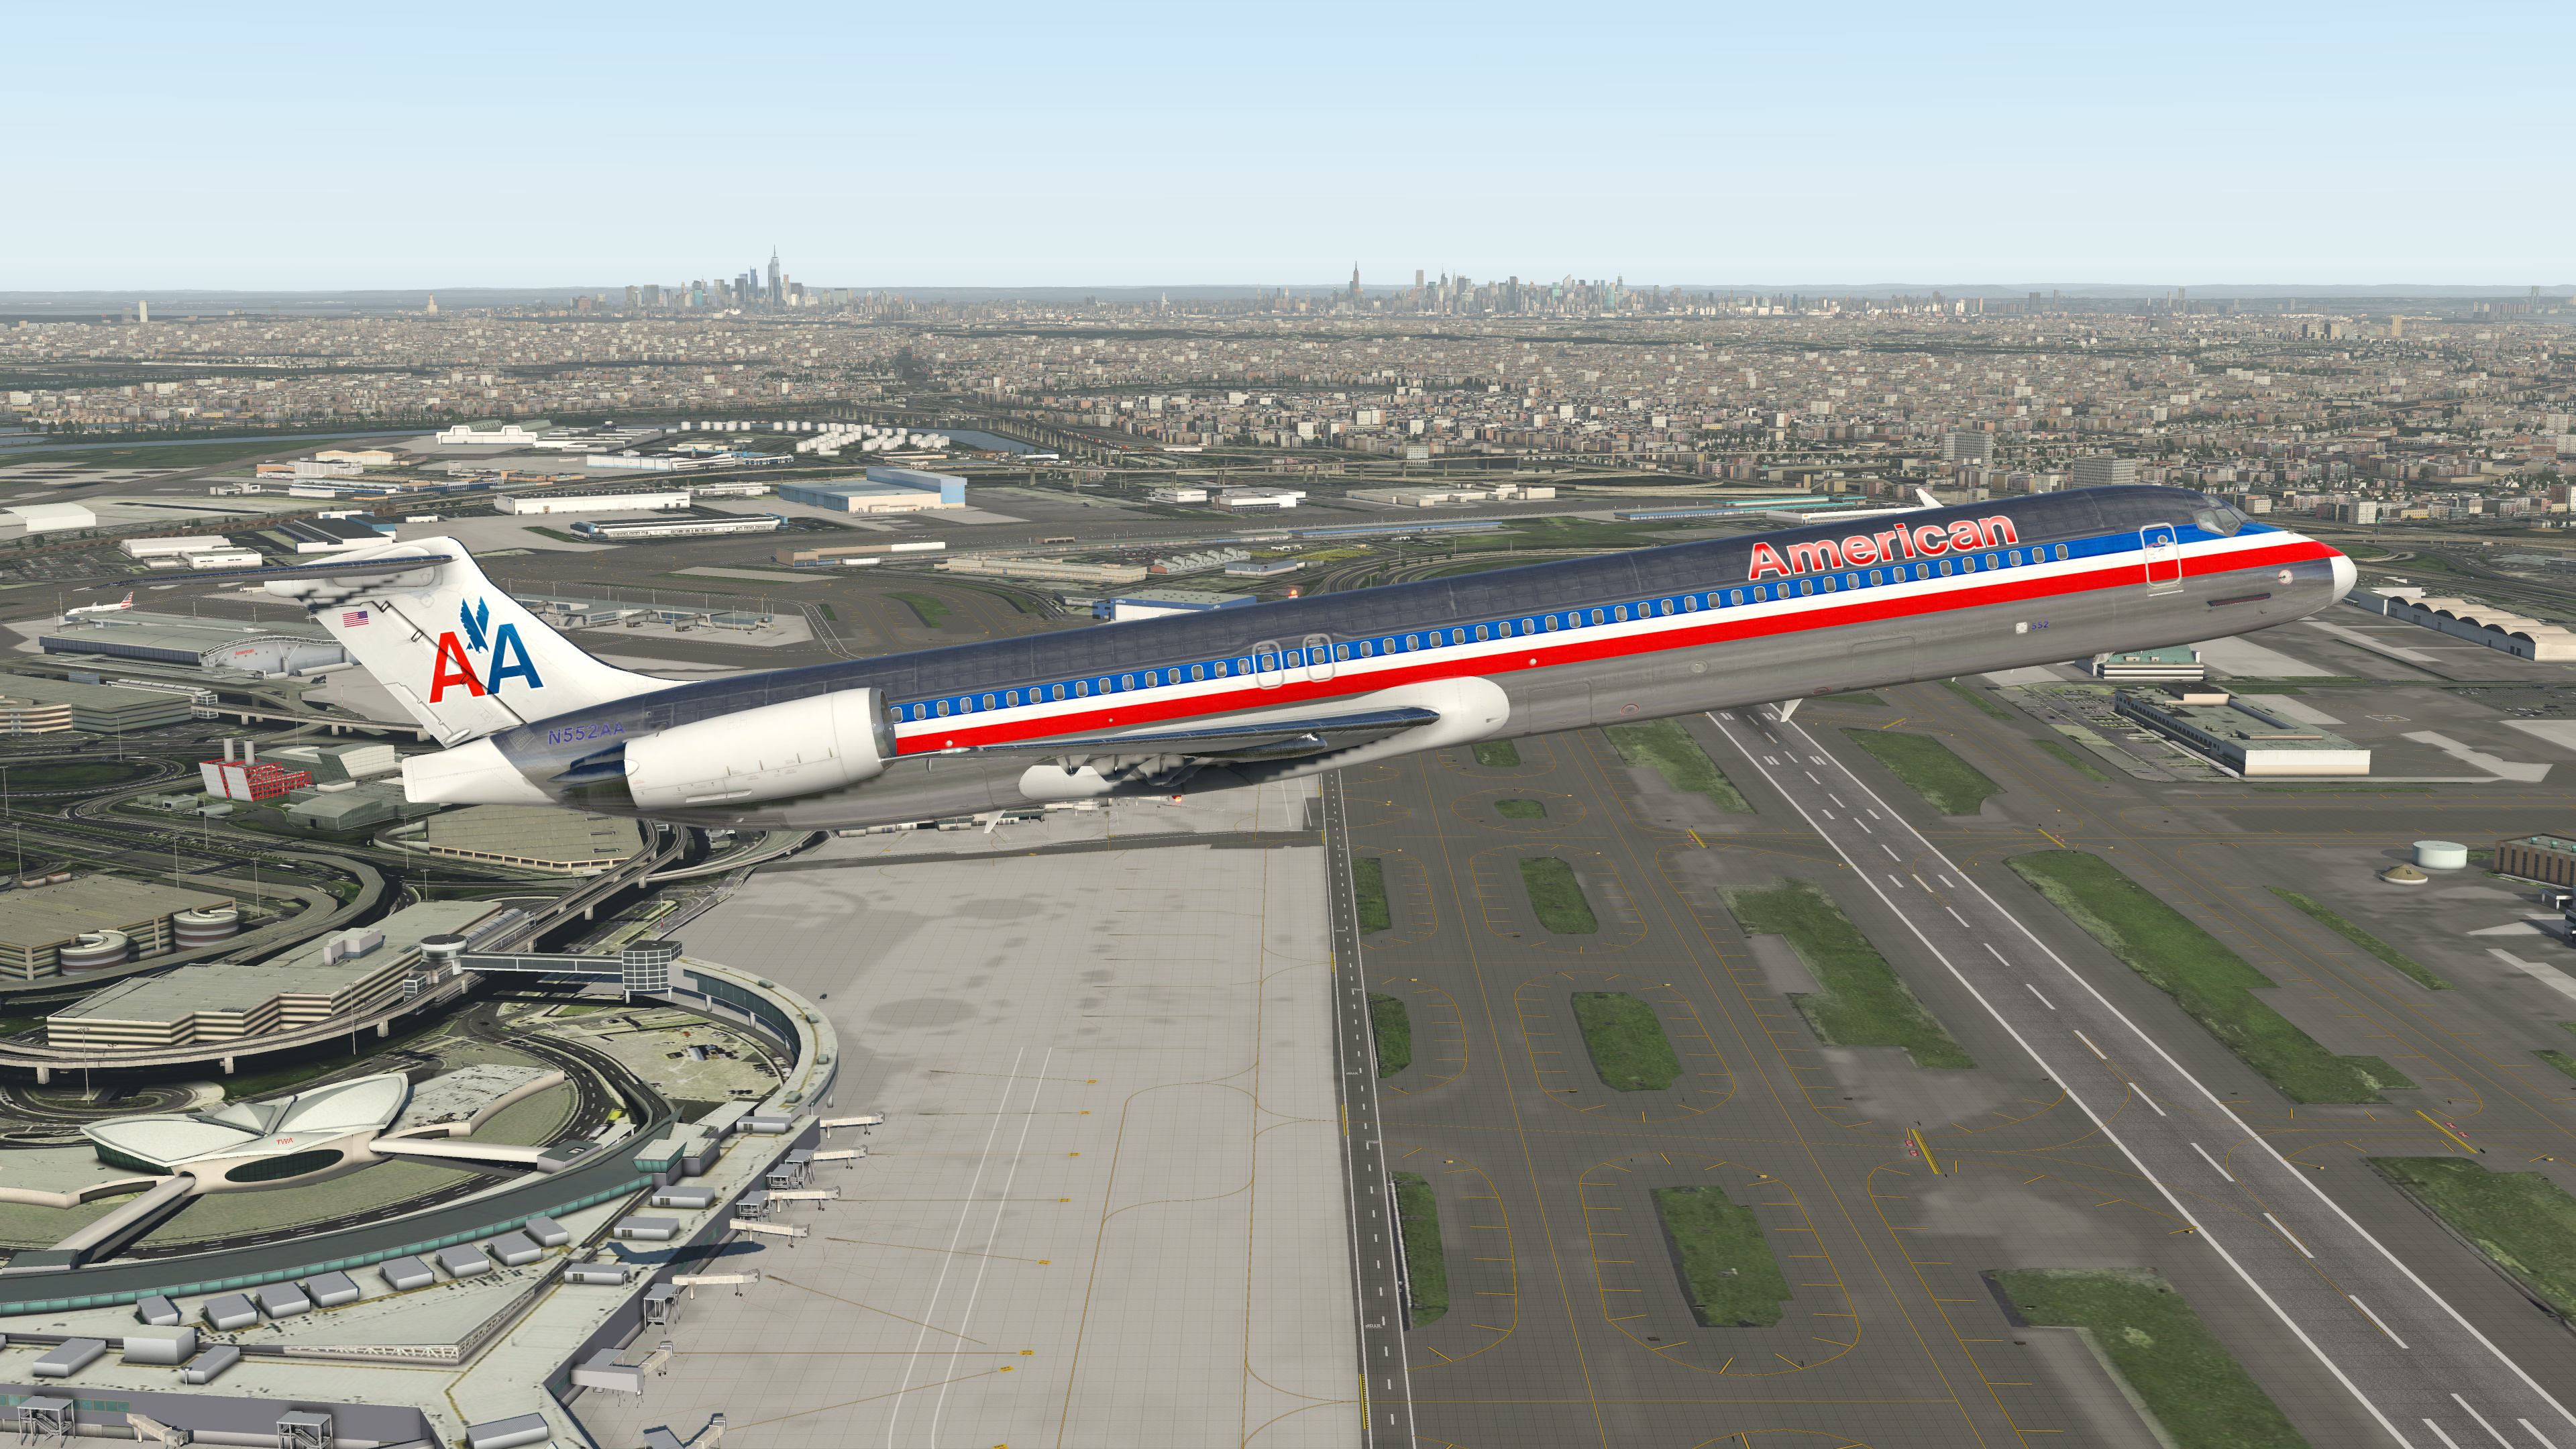 video game, x plane 11, aircraft, airport, mcdonnell douglas